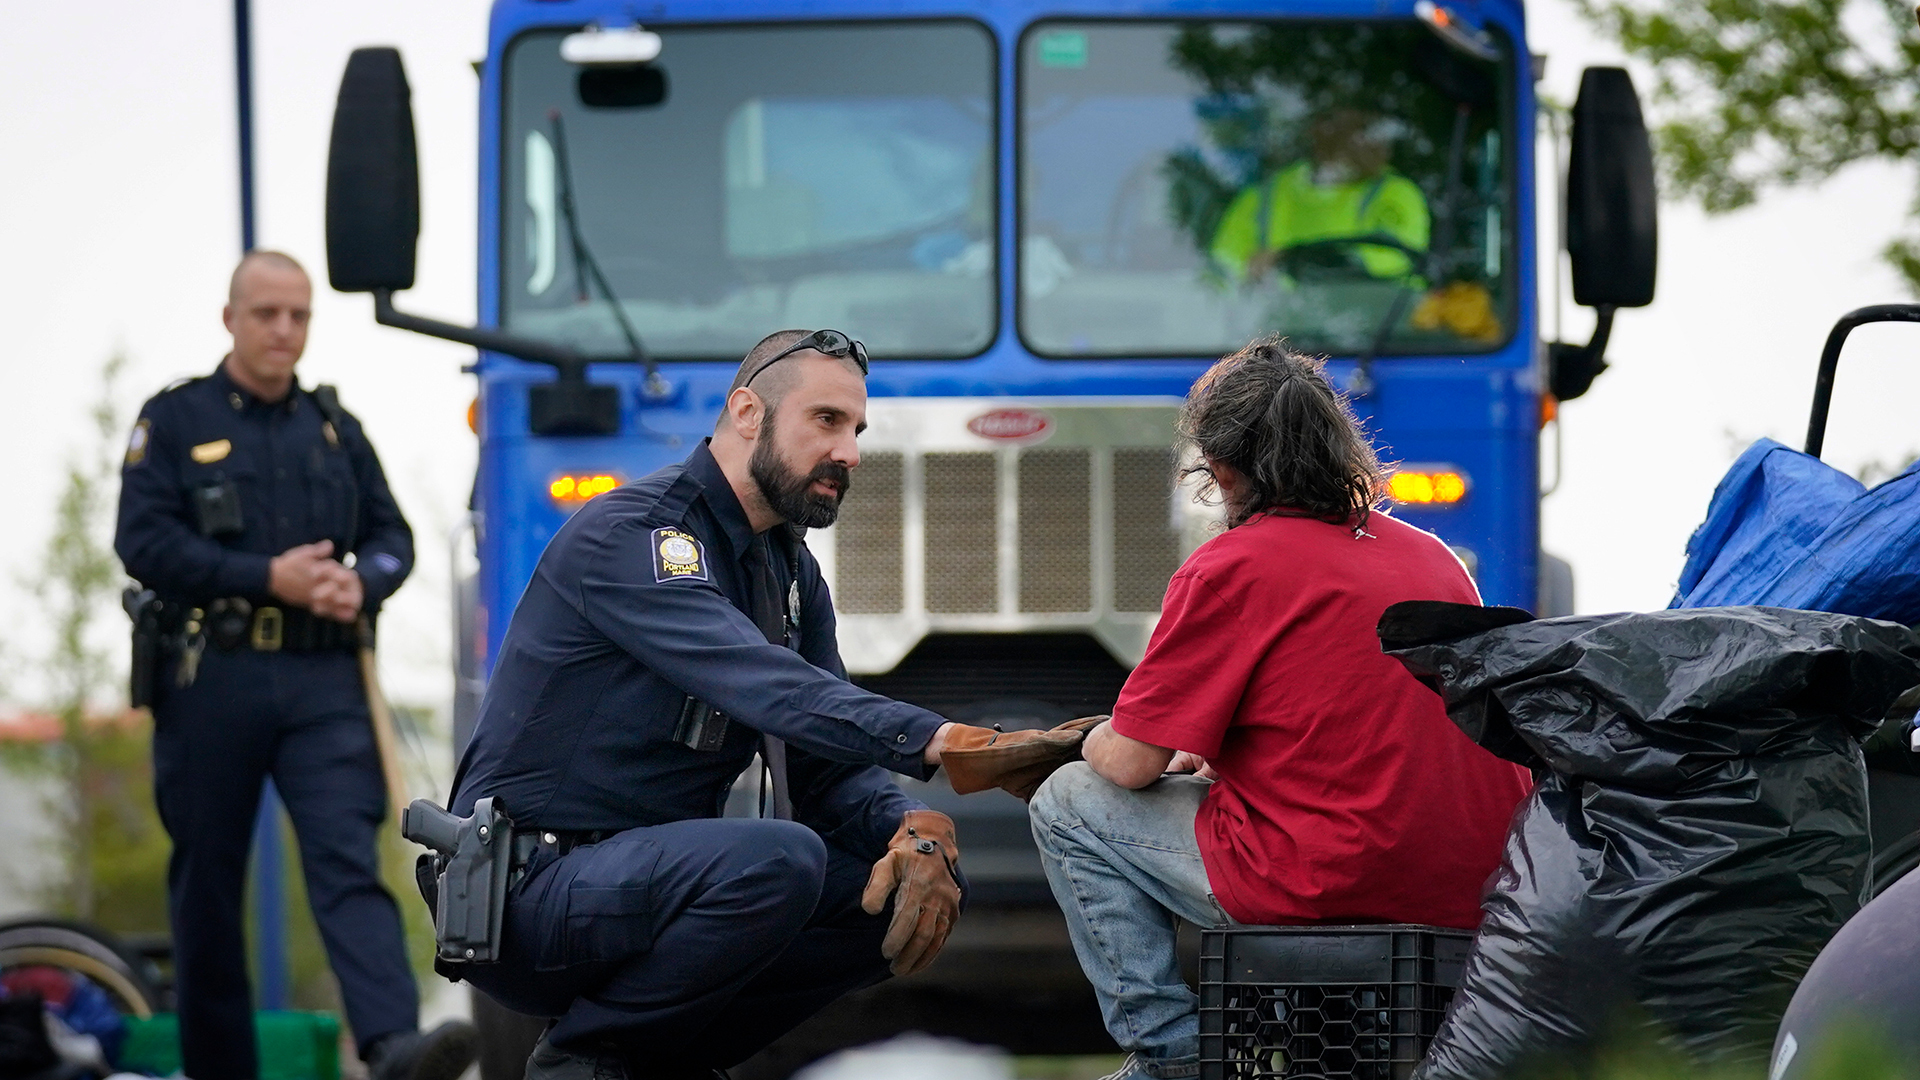 A police officer speaks to an unhoused man with a truck in the background.